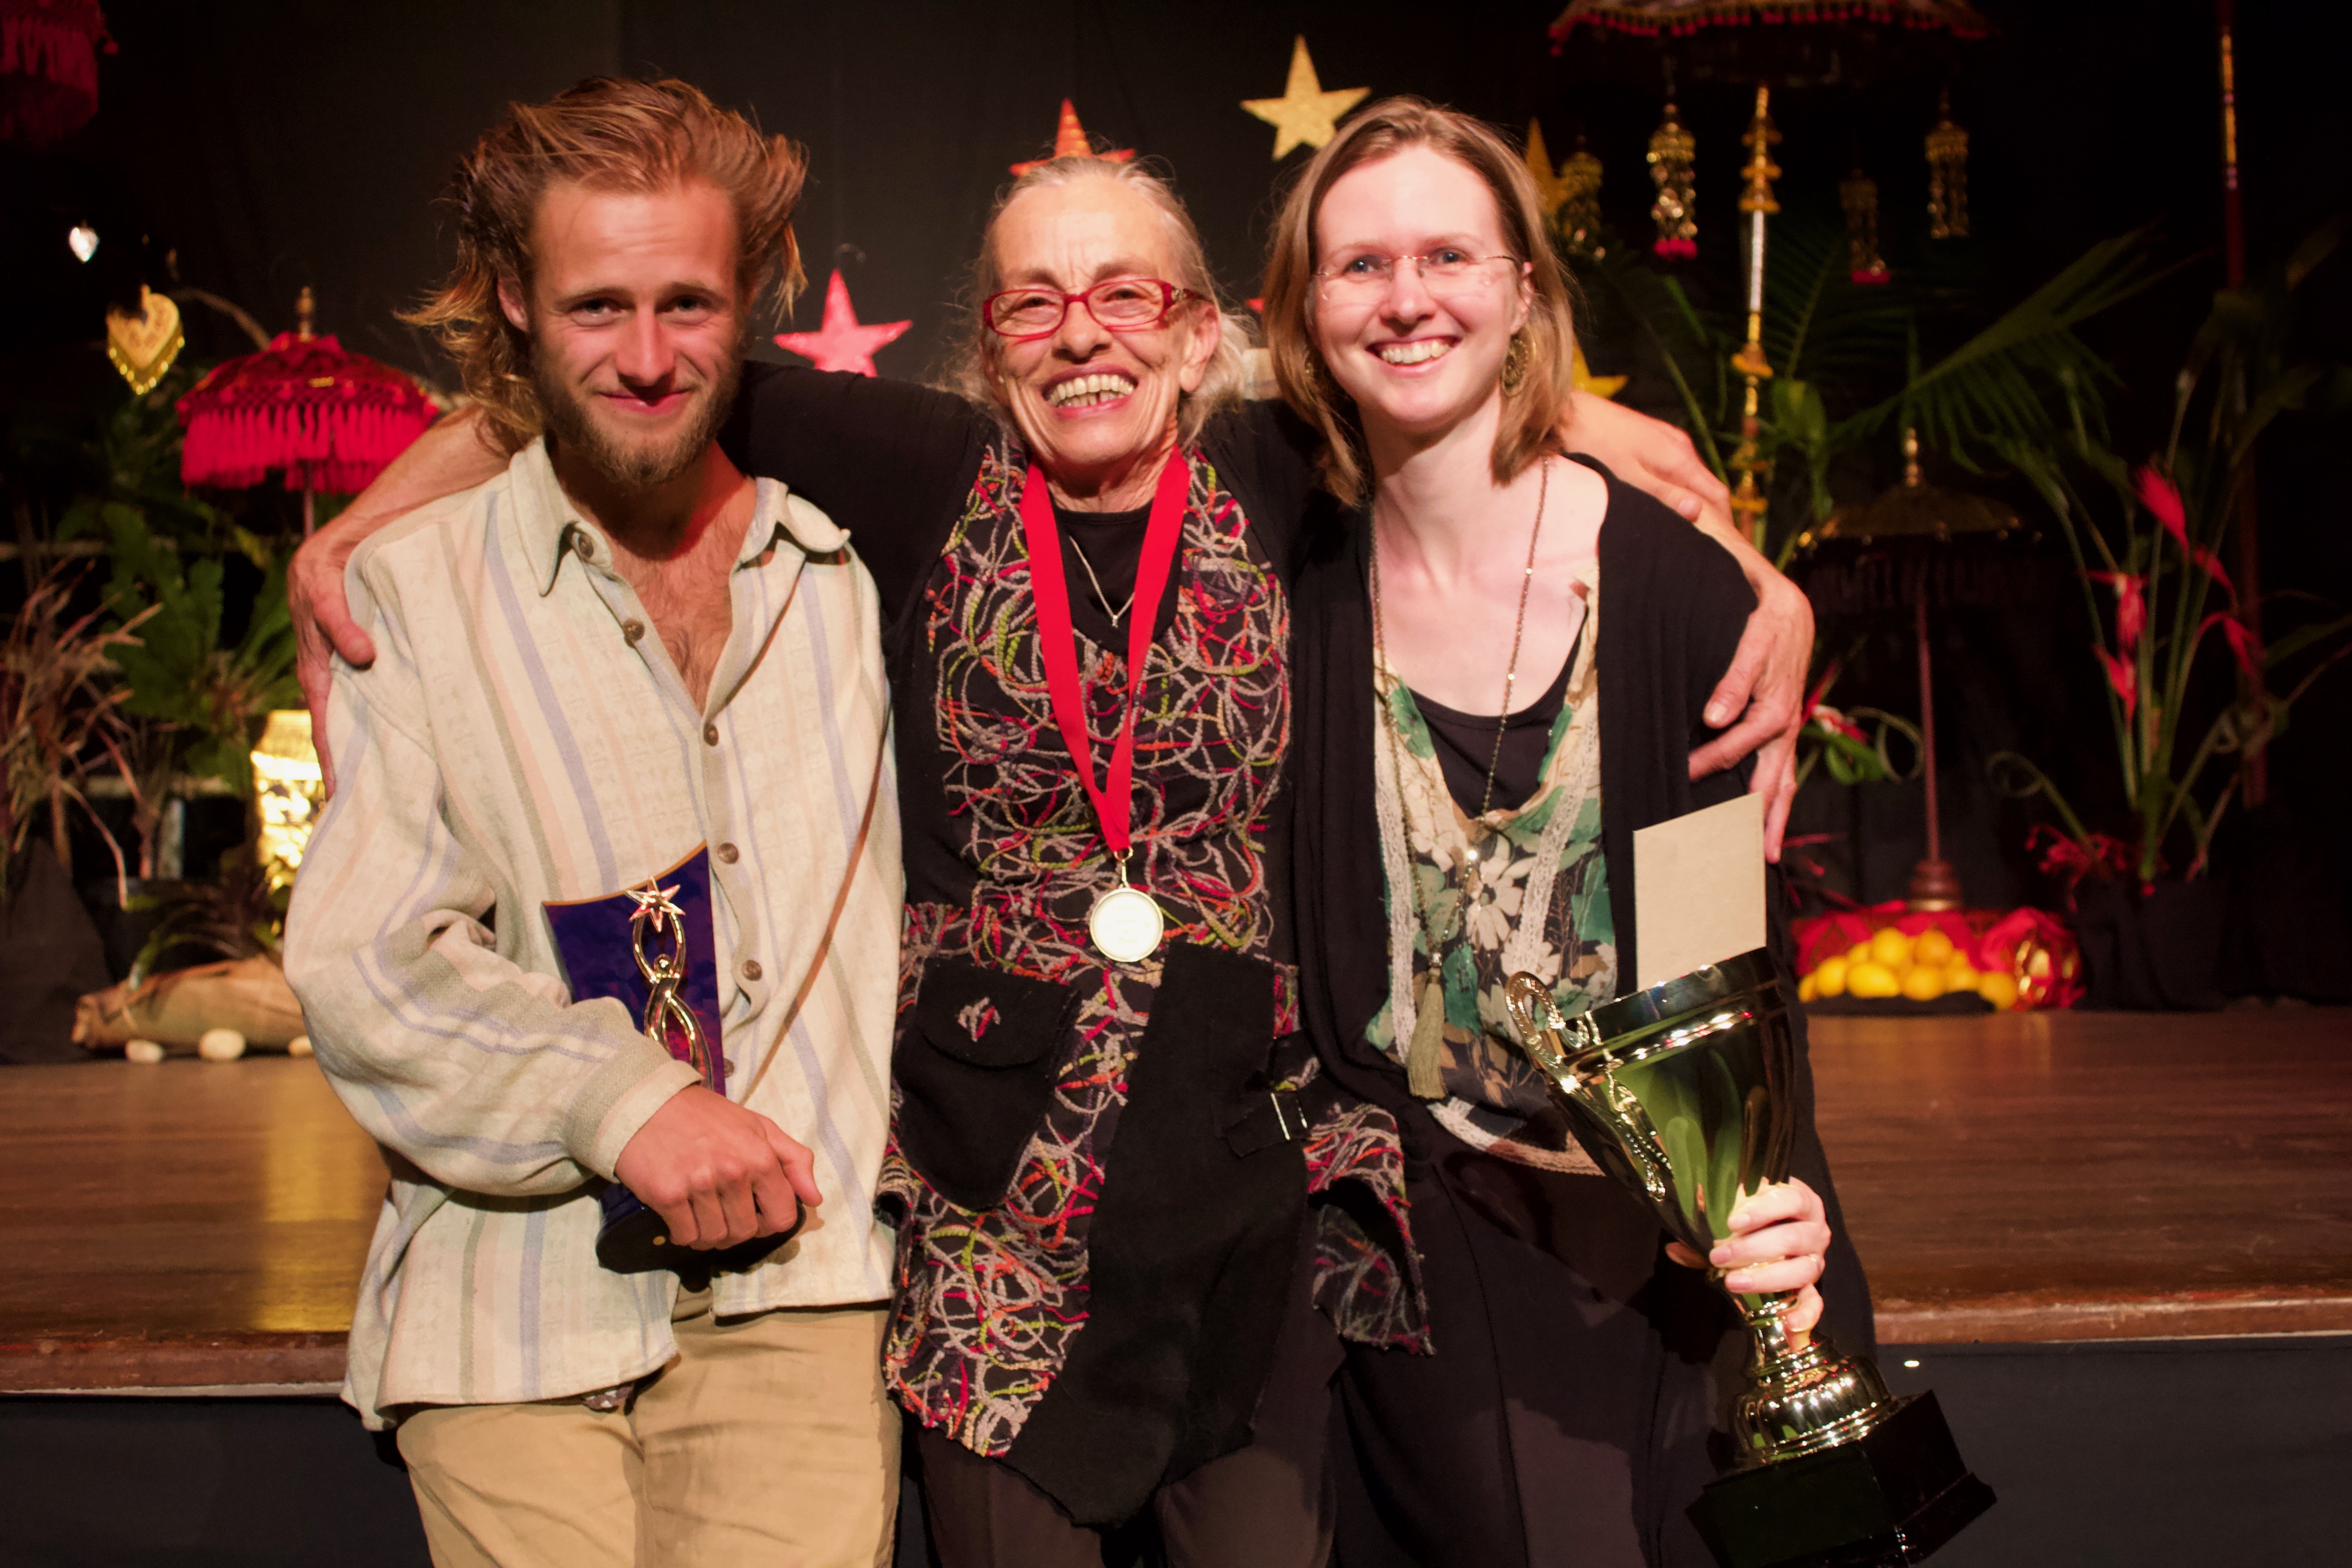 31-Gail M Clarke with Peoples Choice Award winner Zac Simmons and 2018 cup winner Sarah Temporal